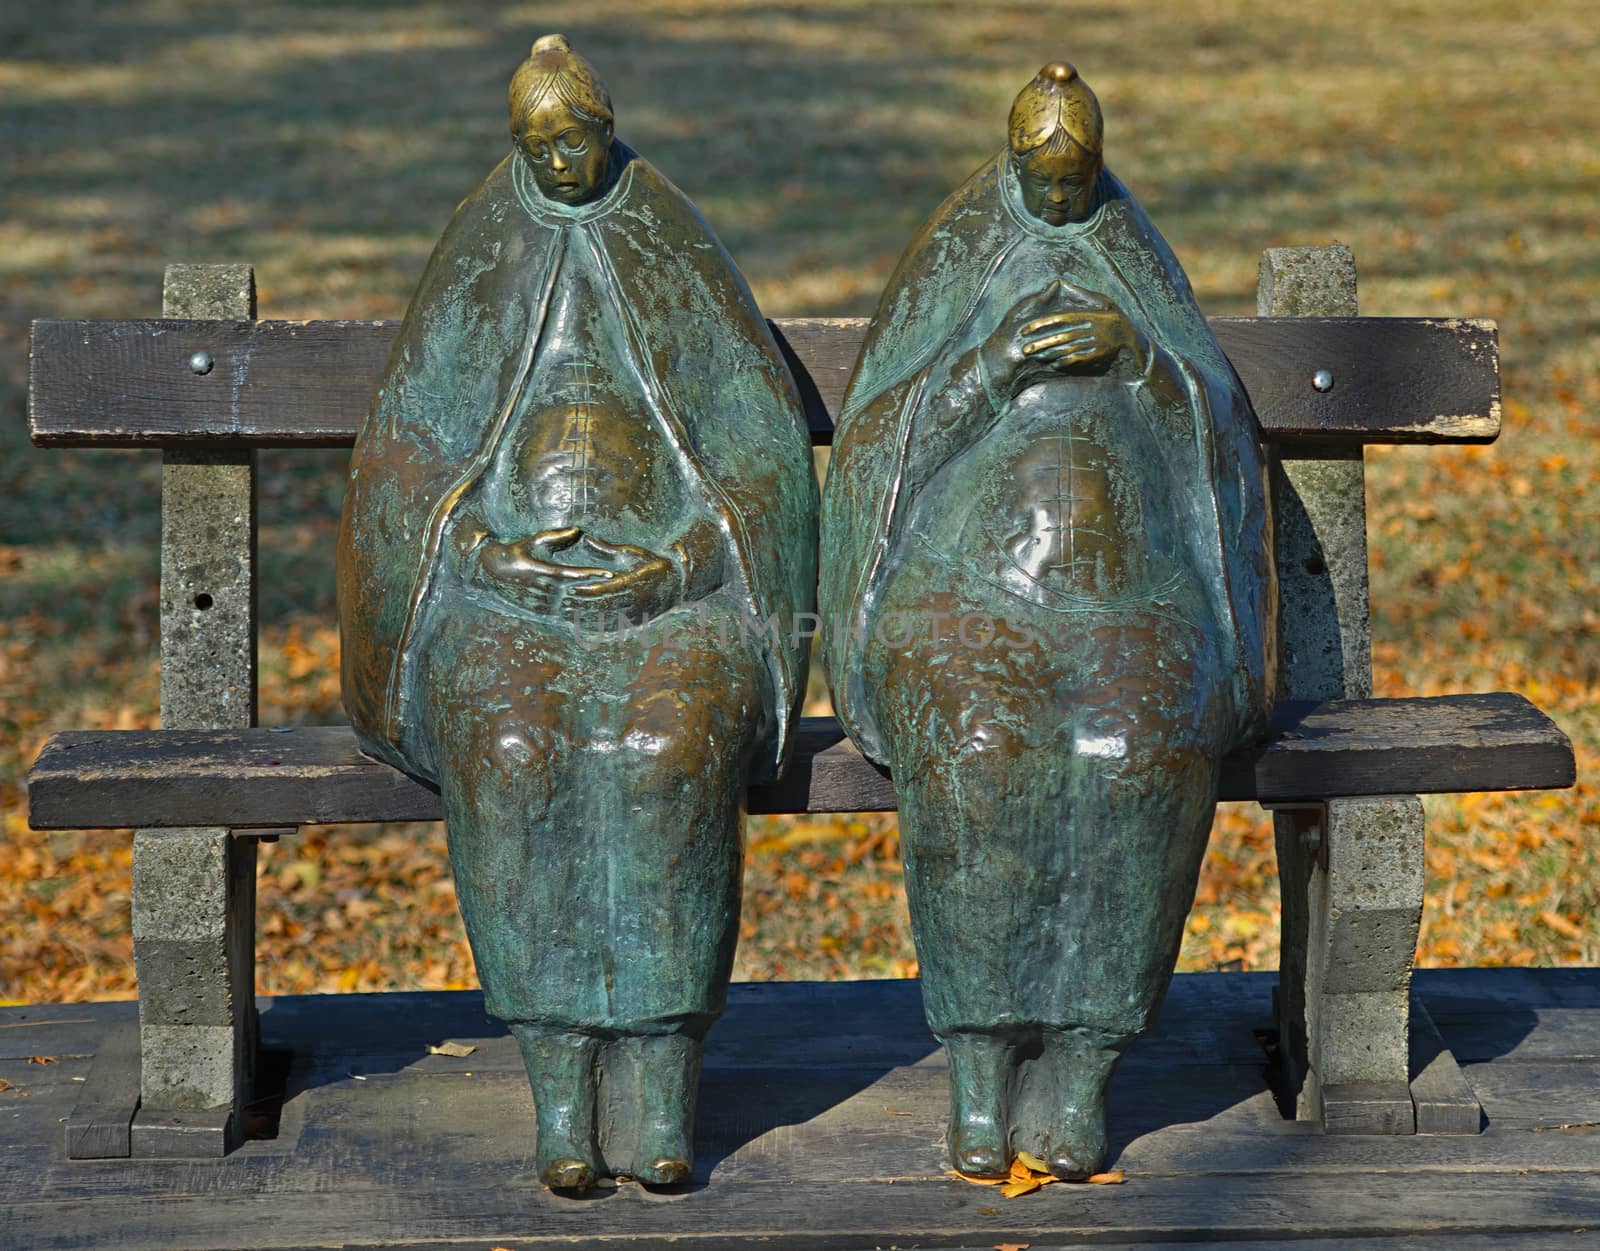 Two women marble figurines sitting on a bench